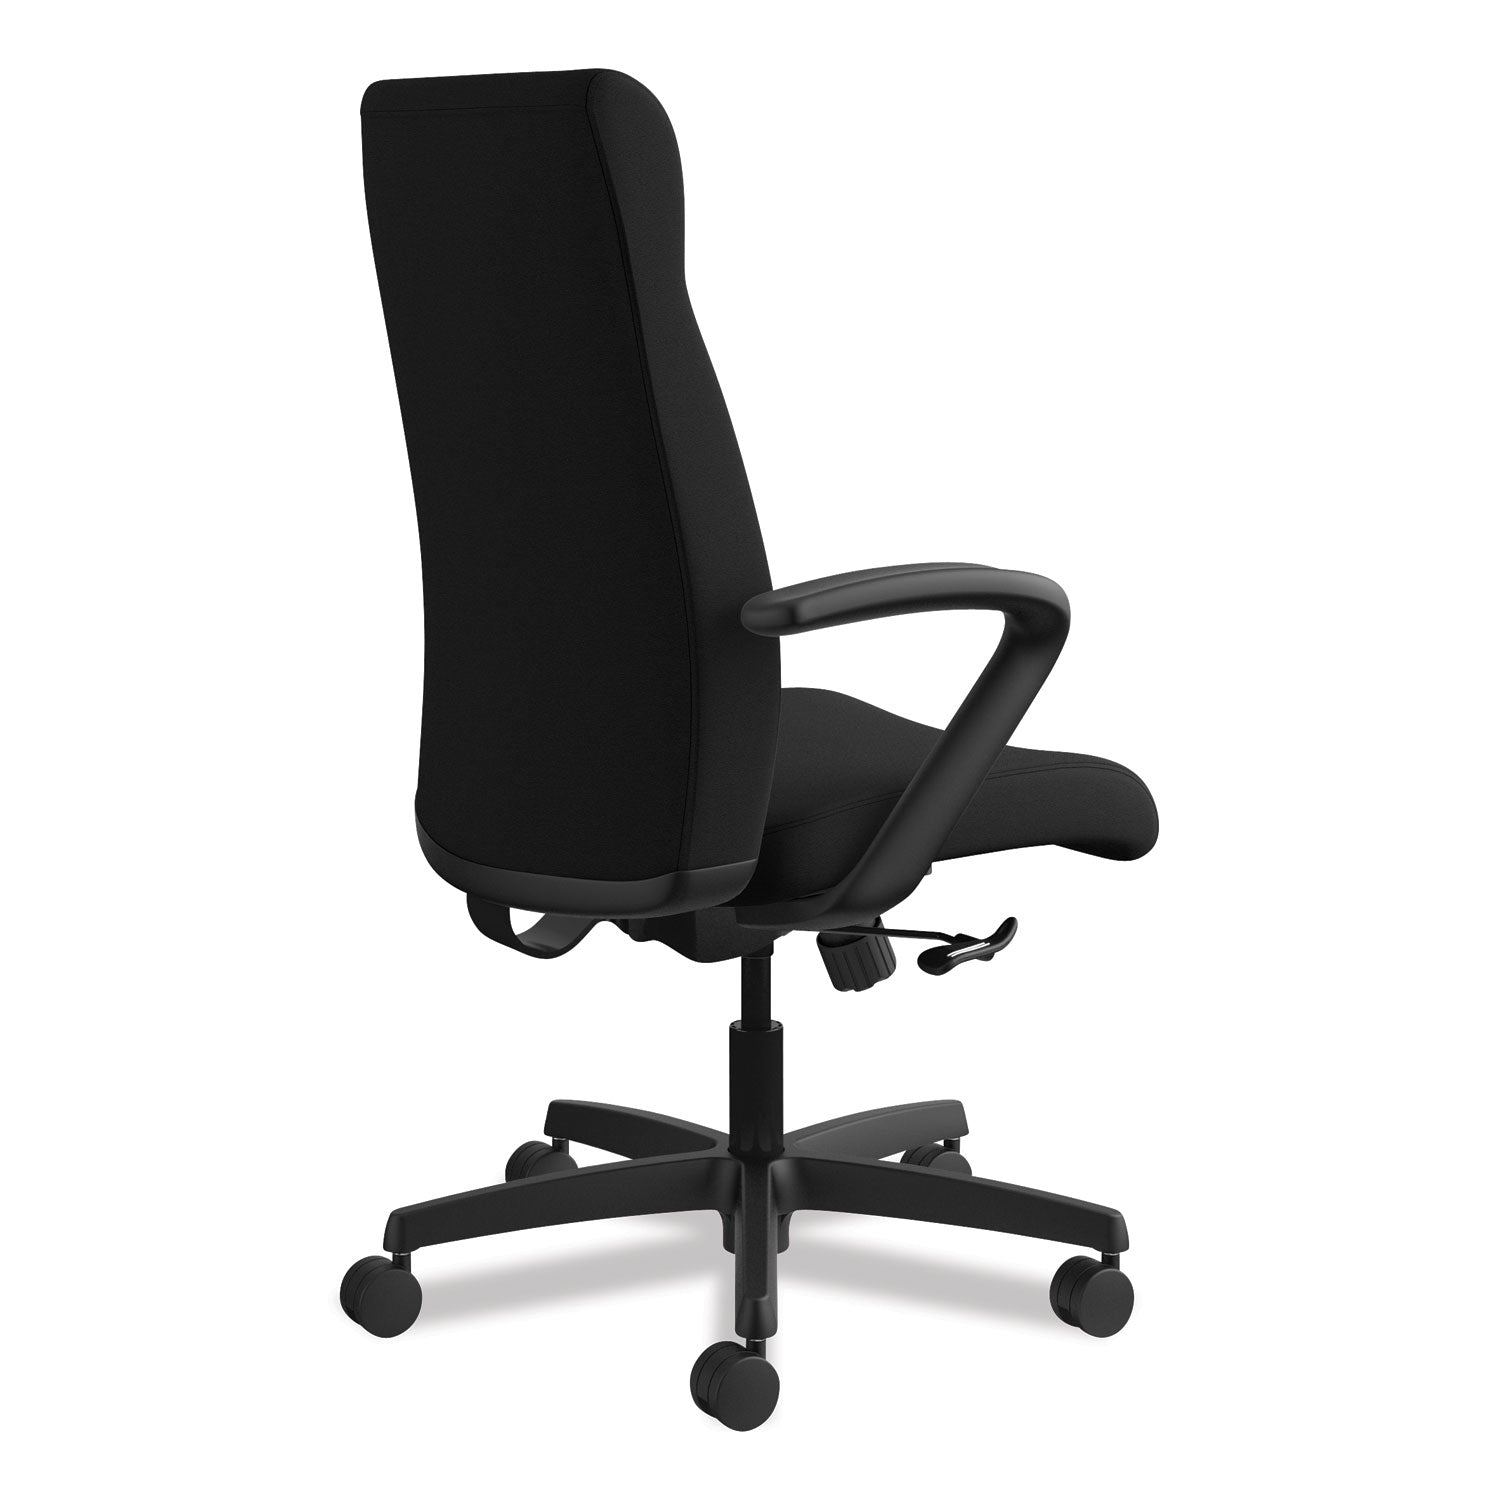 ignition-series-executive-high-back-chair-supports-up-to-300-lb-17-to-21-seat-height-black_honie102cu10 - 5